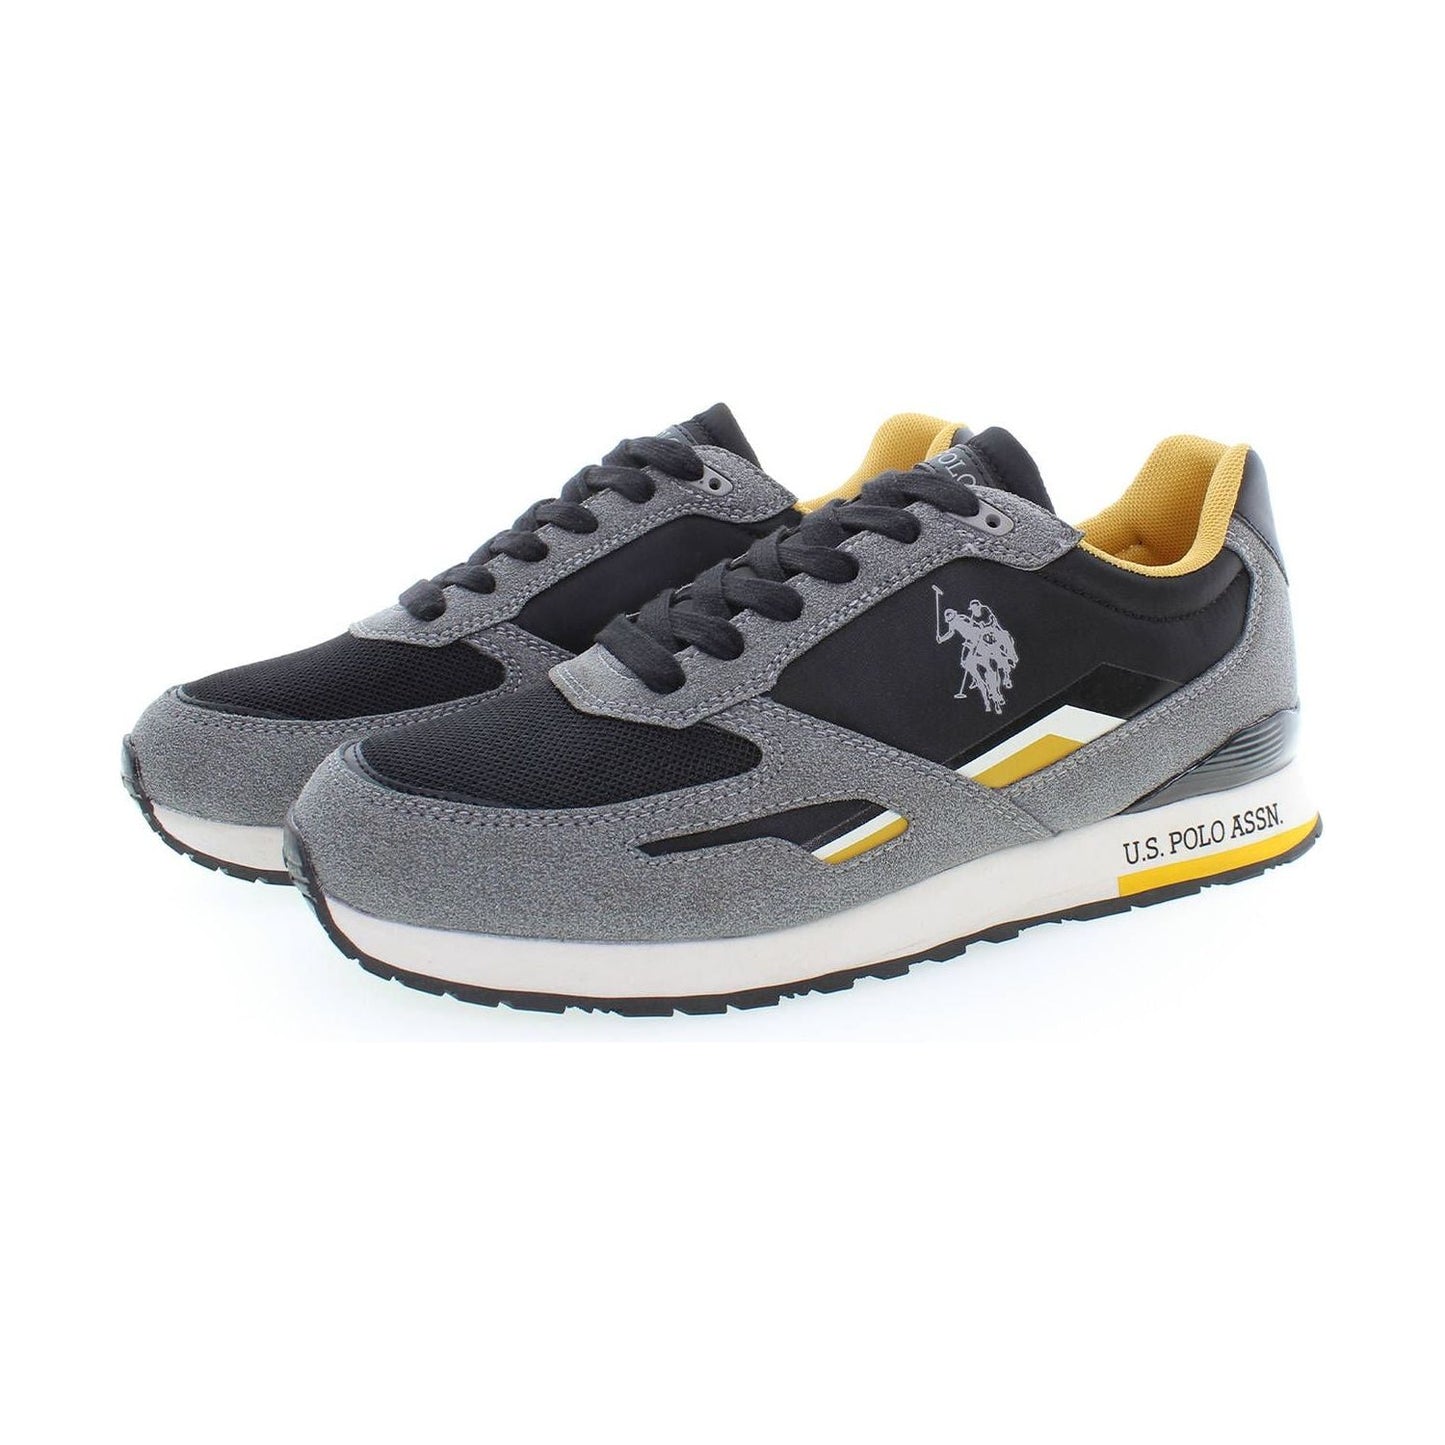 U.S. POLO ASSN. | Chic Gray Lace-Up Sporty Sneakers| McRichard Designer Brands   